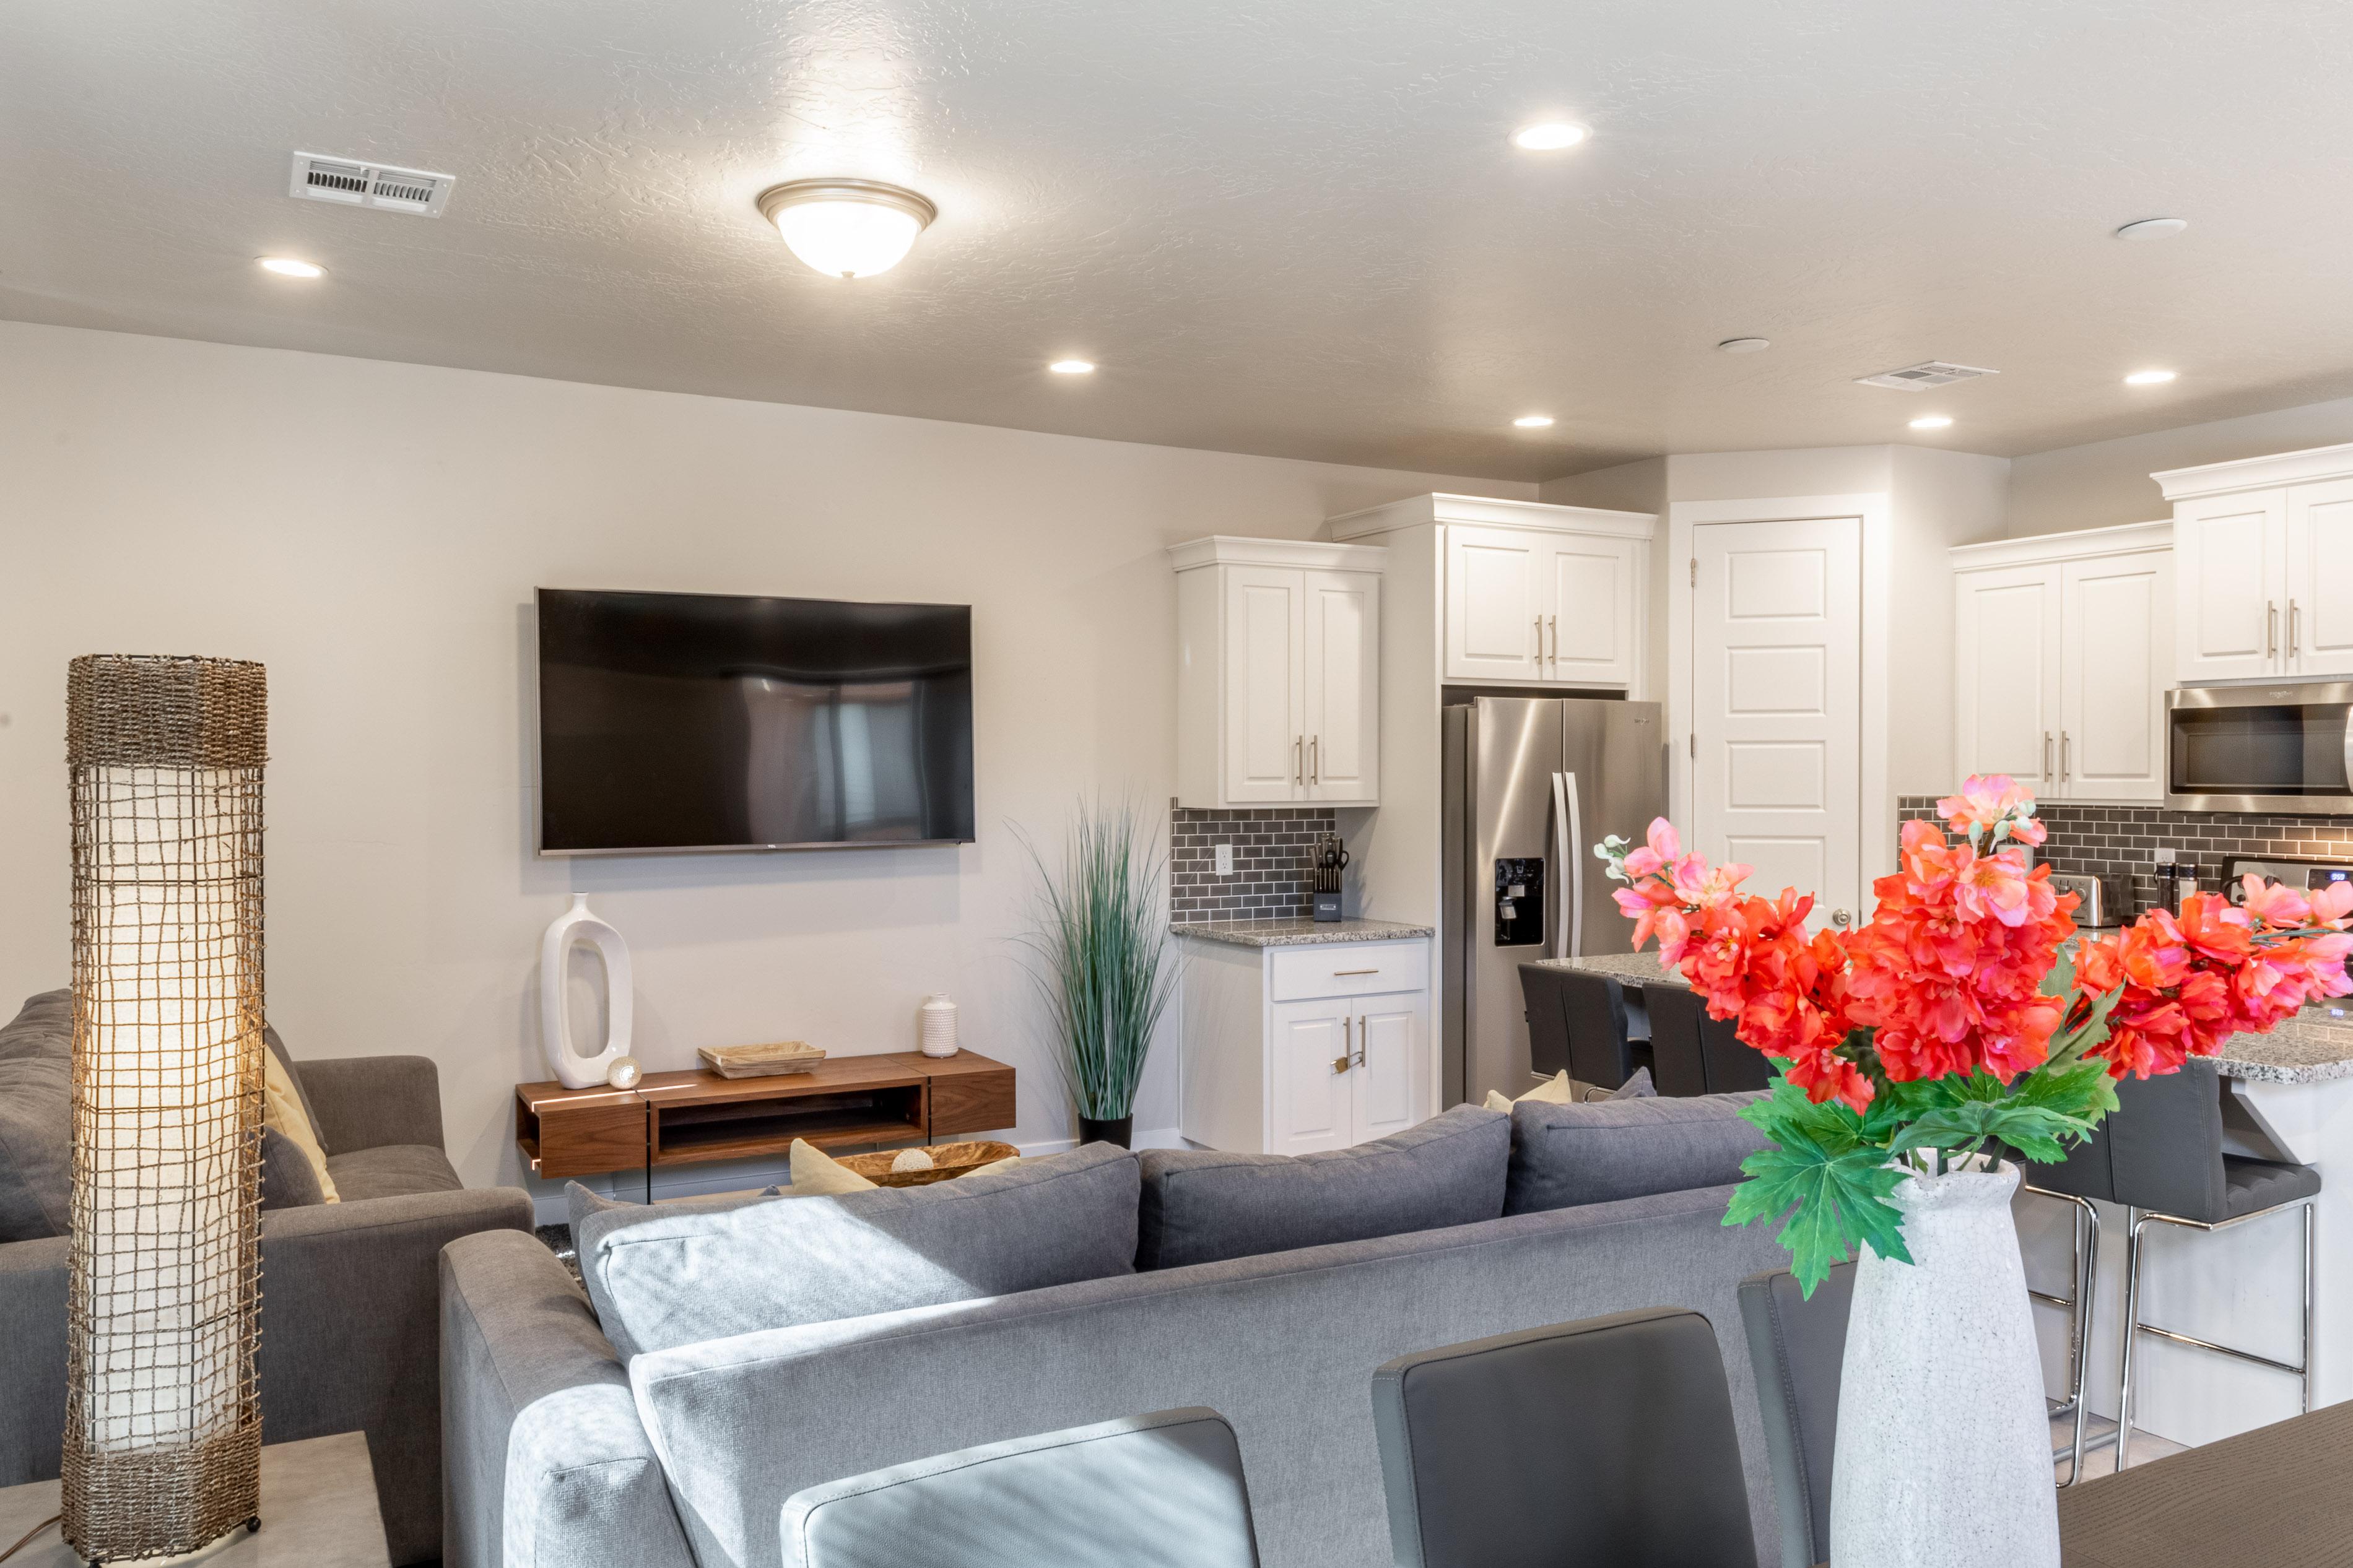 With an open and spacious floor plan, the Dining Room and Kitchen can accommodate meal preparations for groups large or small. 